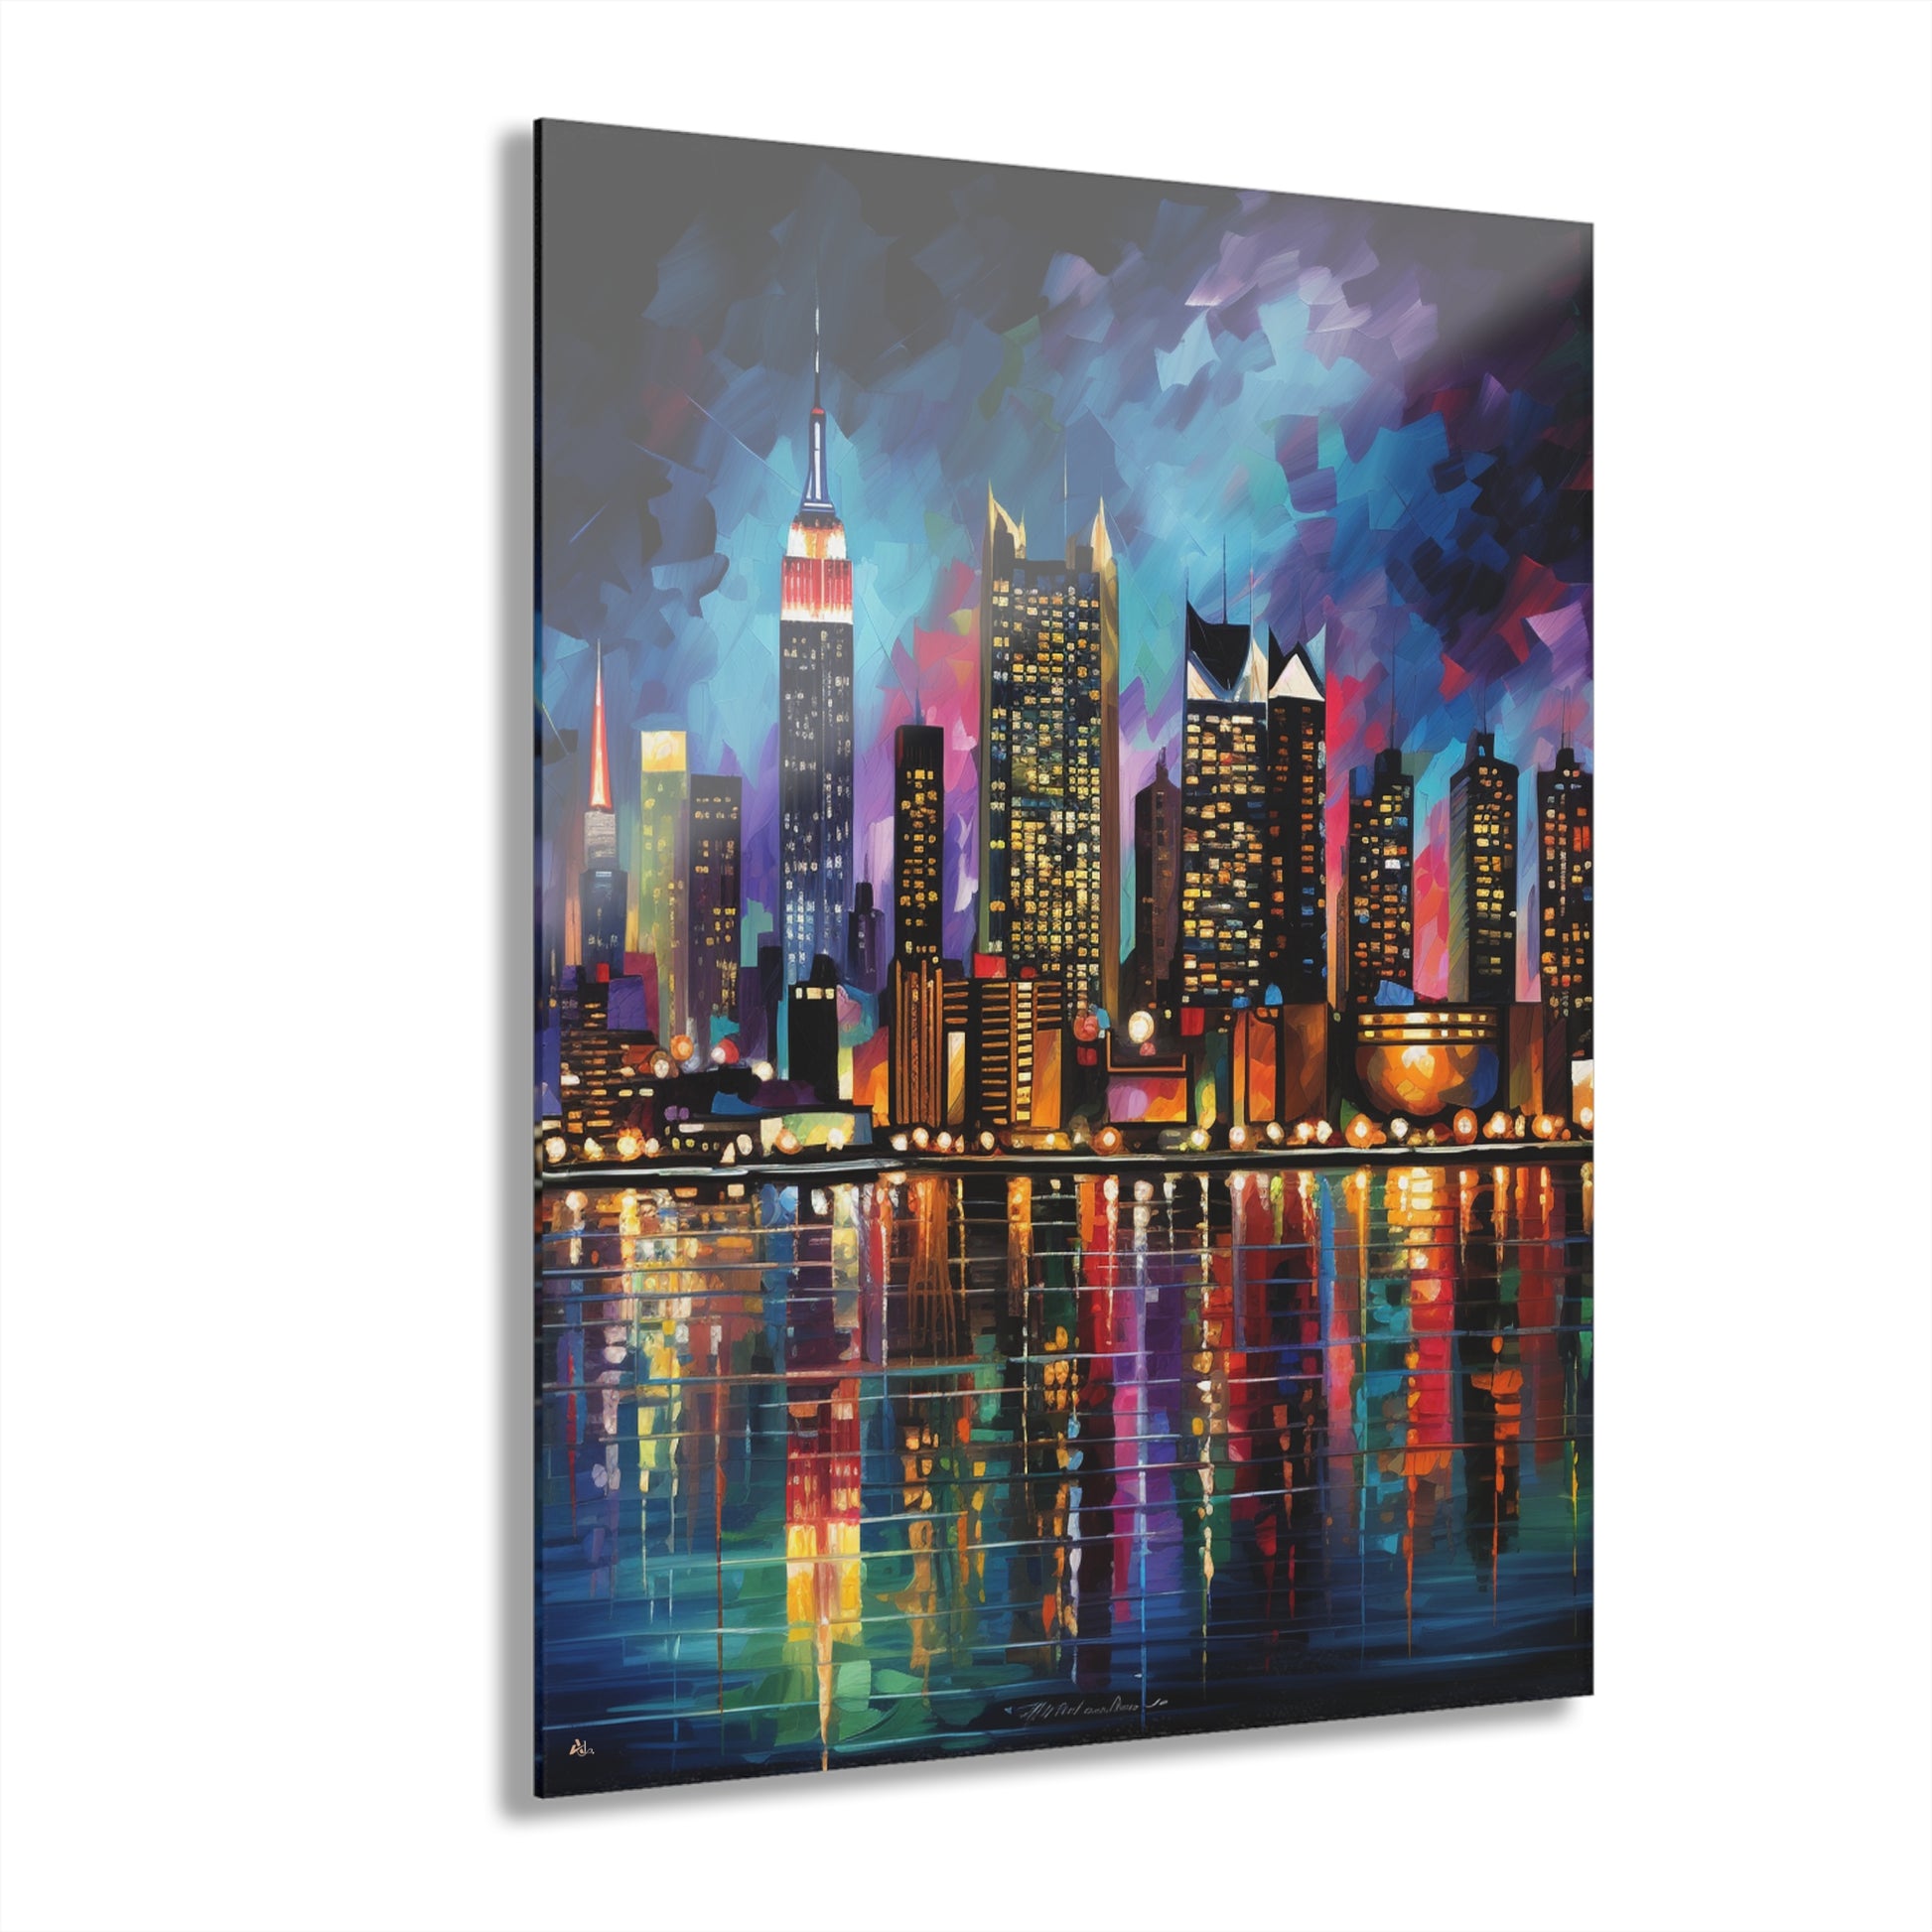 Glow in the Dark Acrylic Painting - 2020Acrylic - Paintings & Prints,  Abstract, Other Abstract - ArtPal